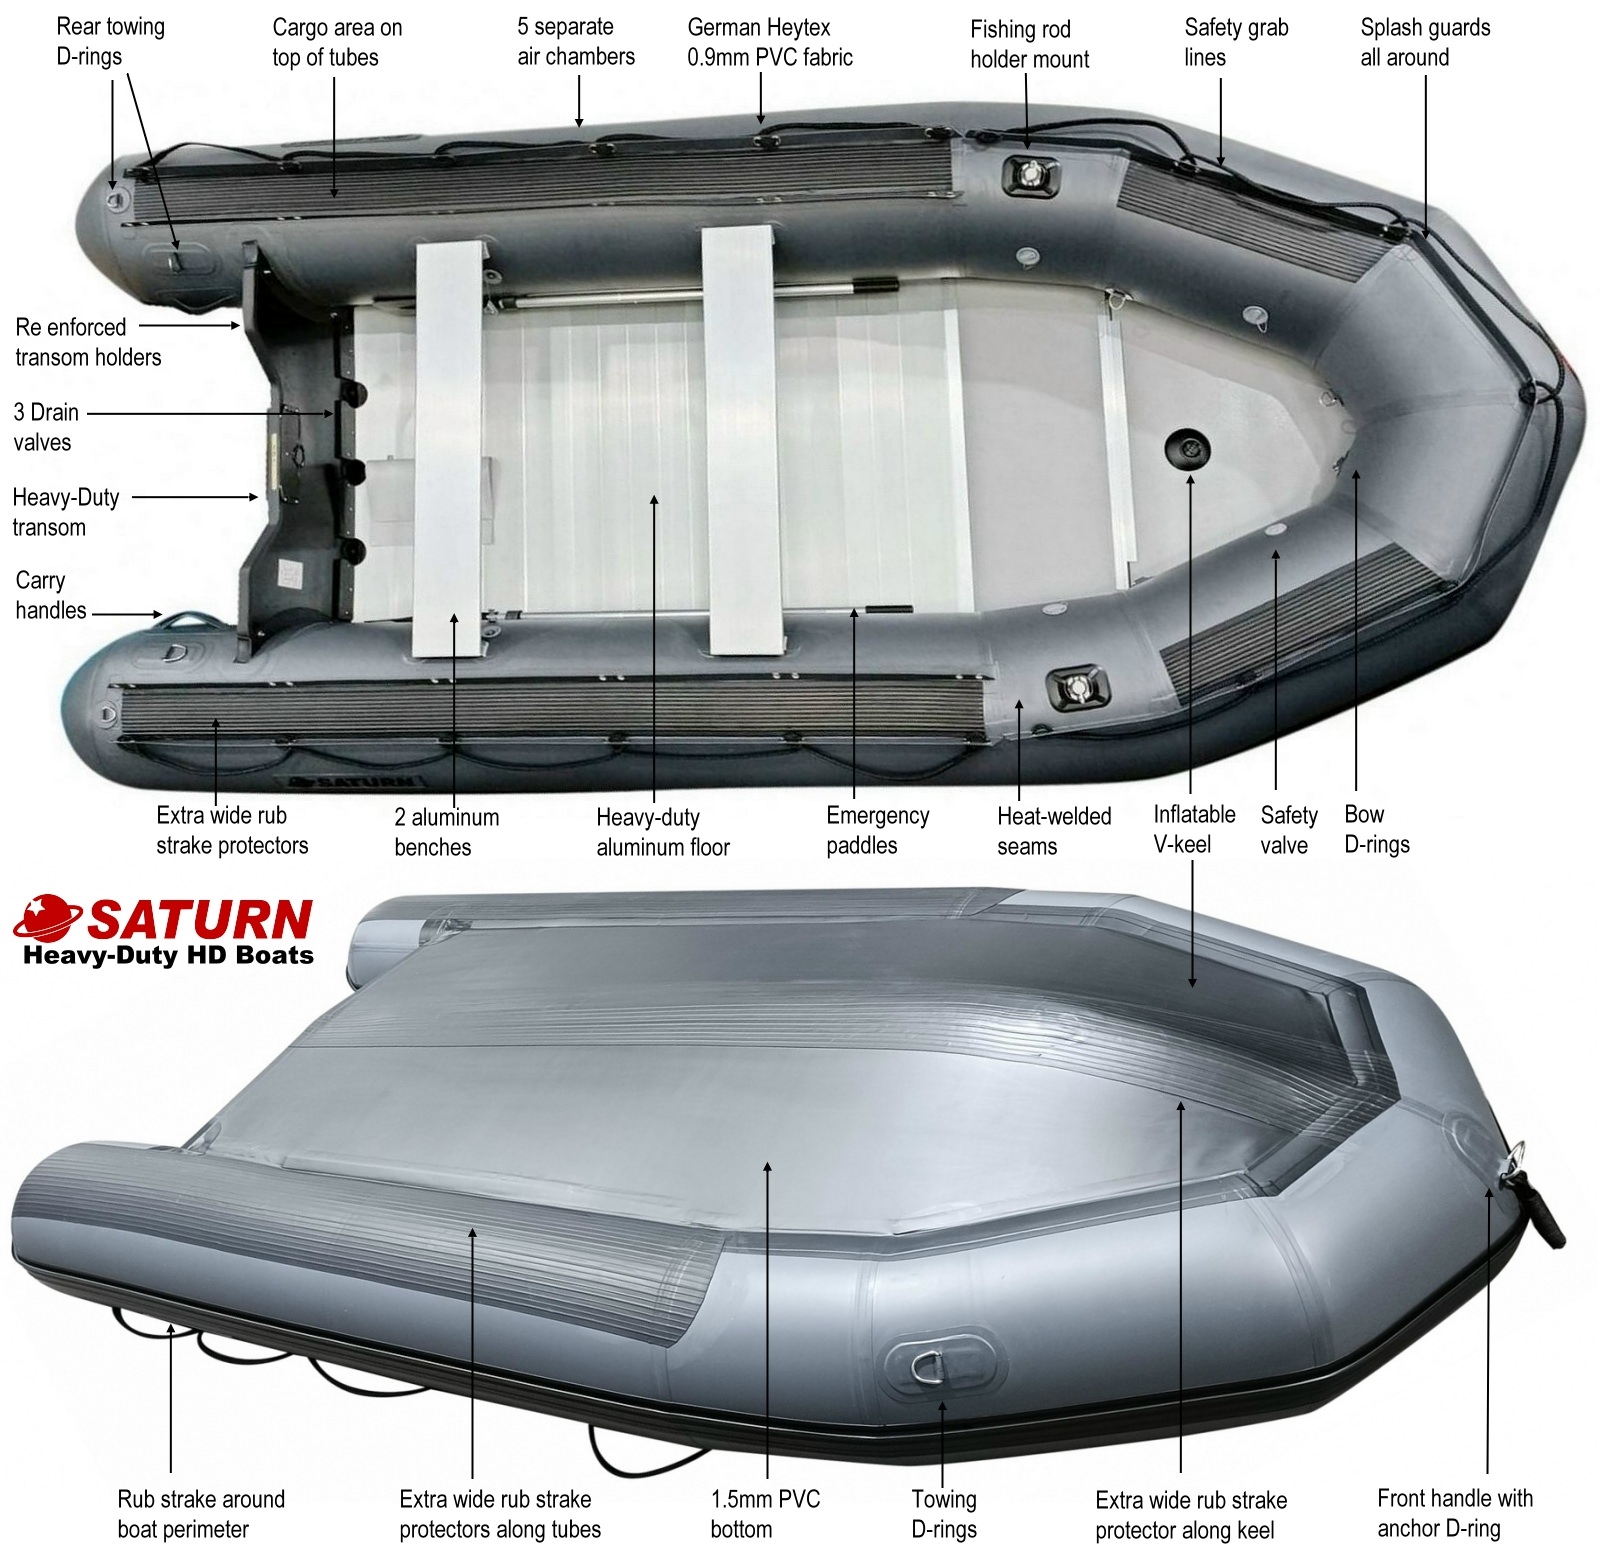 Saturn HD430 heavy-duty inflatable boat specifications